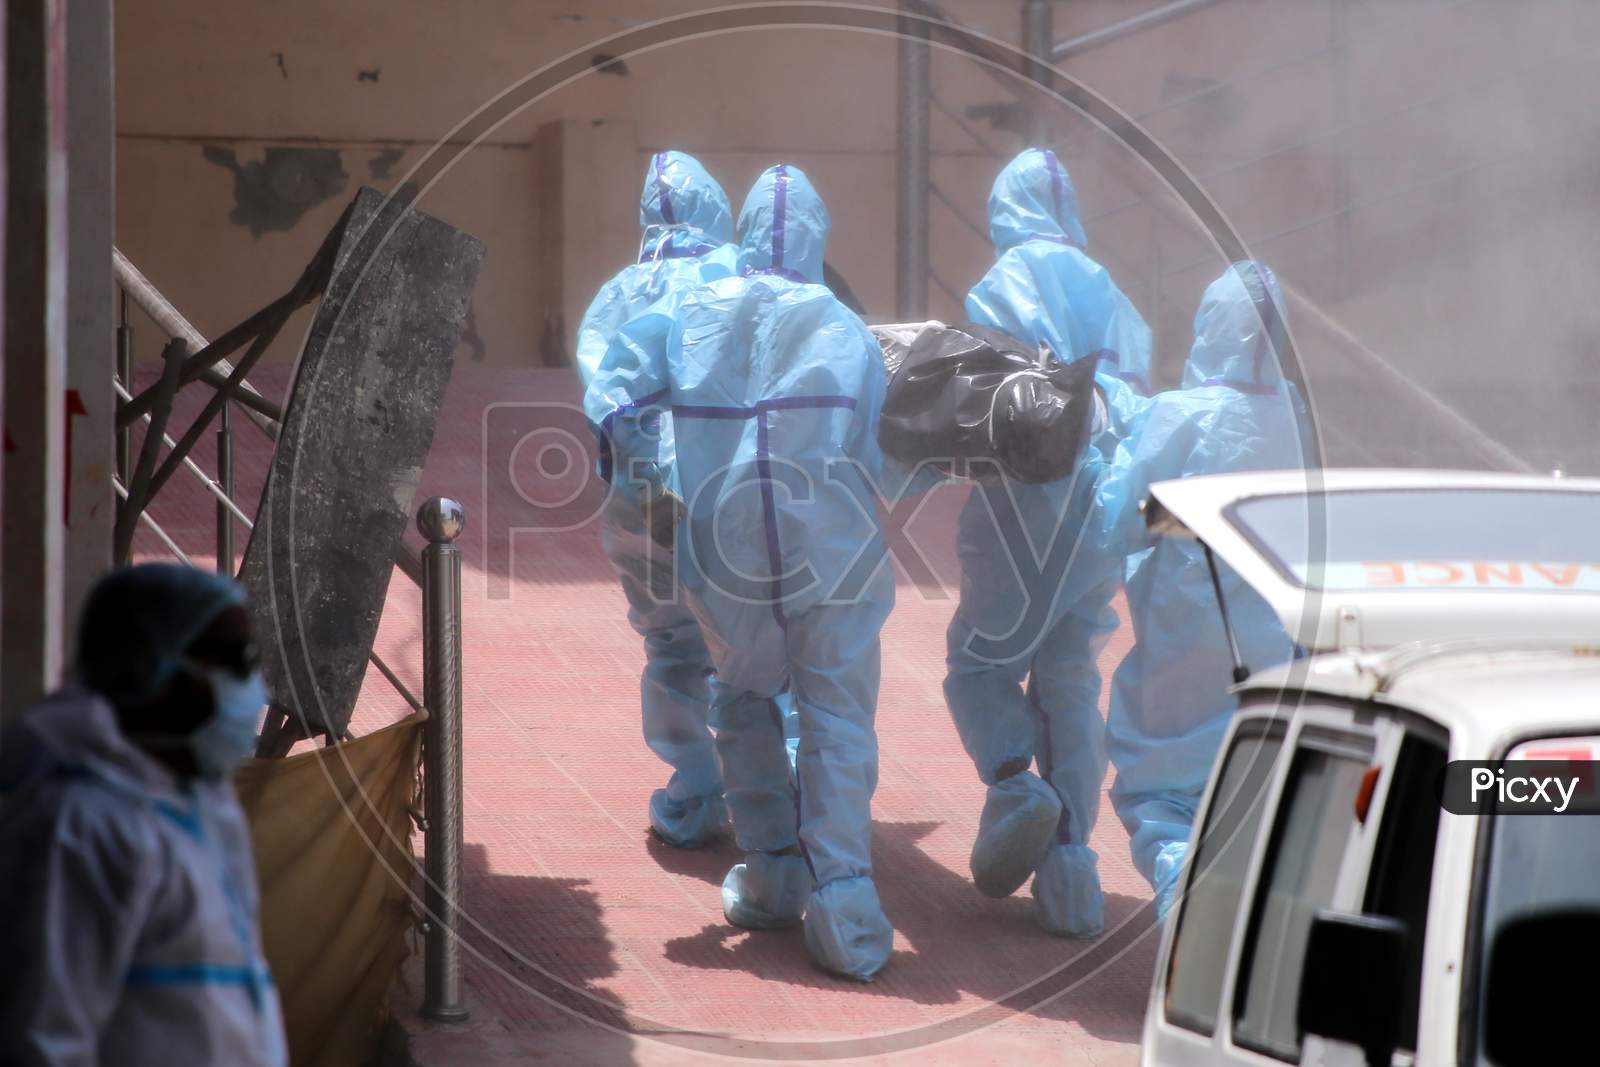 Health workers in hazmat suits carry the dead body of a person who died due to the coronavirus infection at a crematorium during the ongoing Covid-19 lockdown in Ajmer, Rajasthan on July 02, 2020.